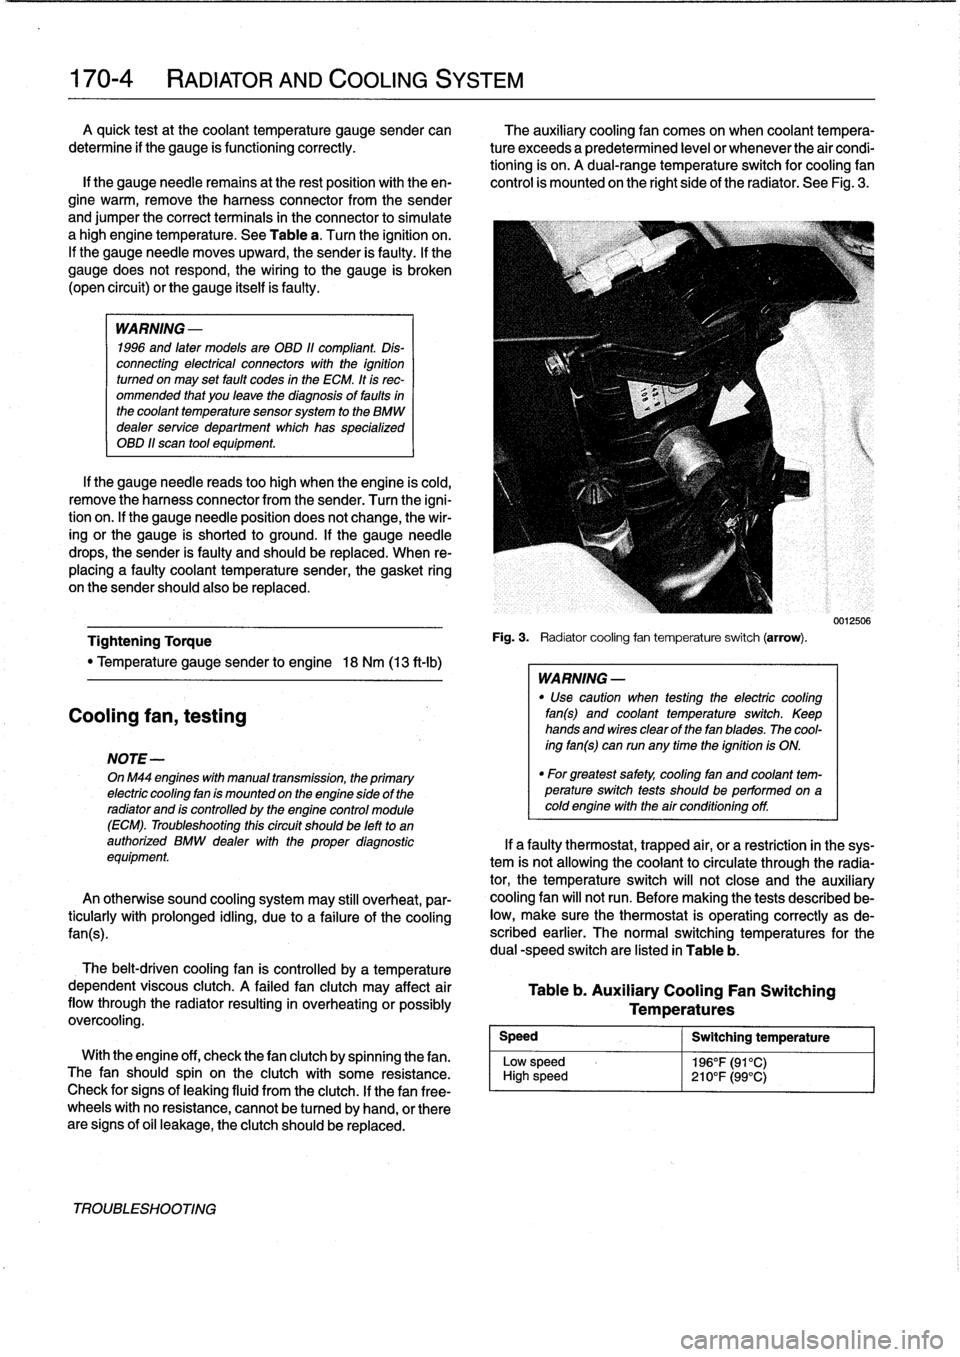 BMW 325i 1992 E36 Workshop Manual 
170-
4

	

RADIATOR
AND
COOLING
SYSTEM
A
quick
testat
the
coolant
temperature
gauge
sender
can

	

The
auxiliary
cooling
fan
comes
on
when
coolant
tempera

determine
if
the
gauge
is
functioning
corre